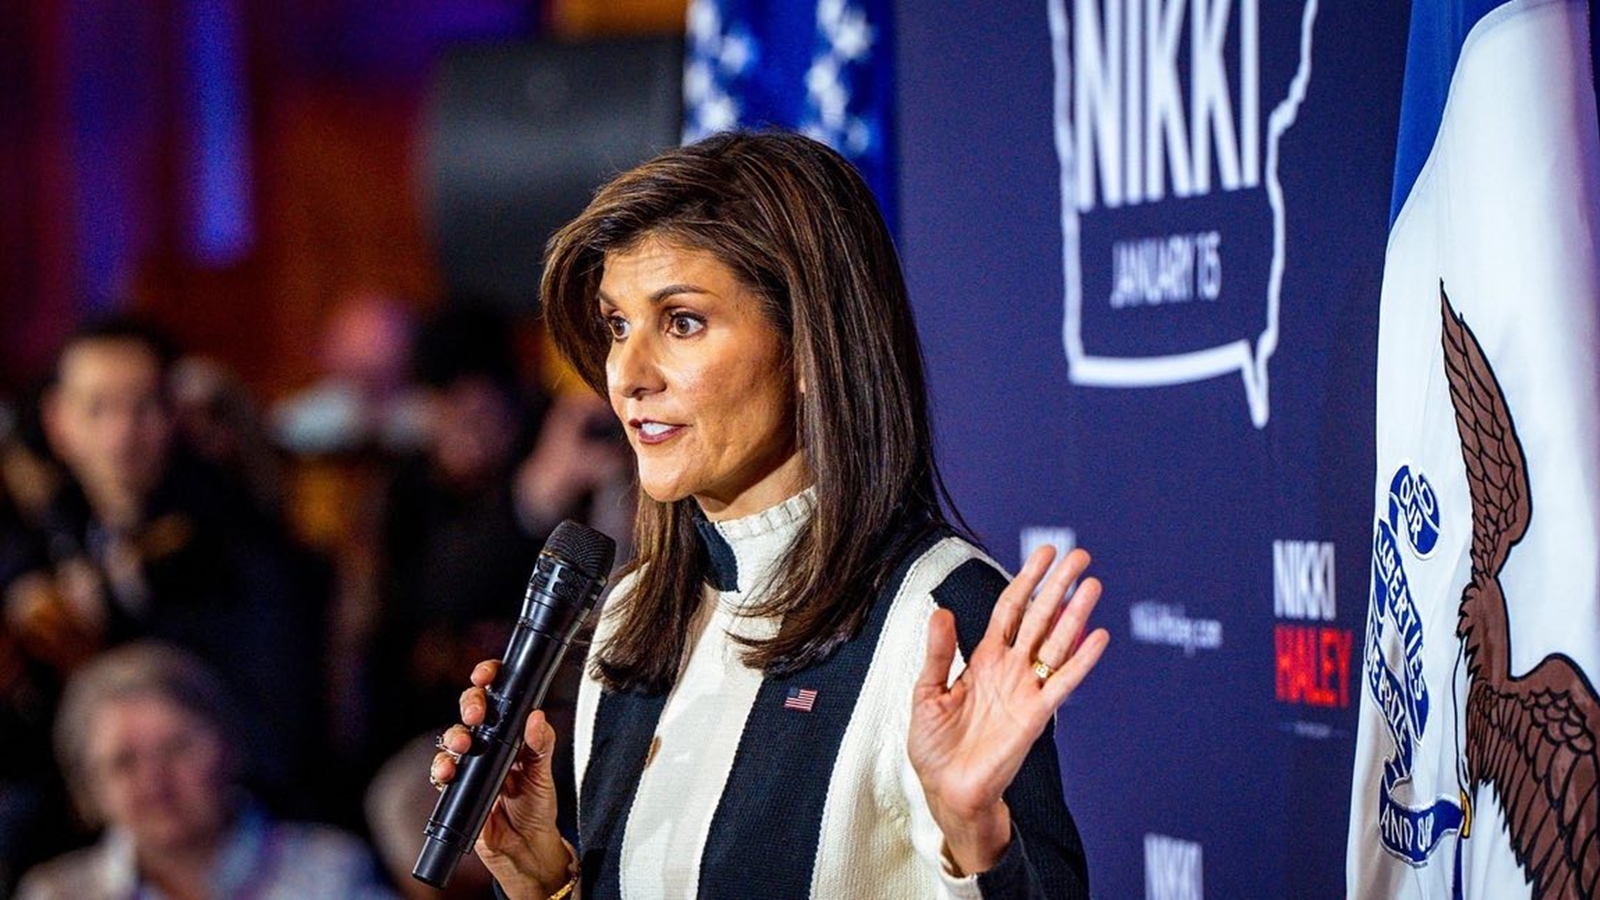 In Iowa, Nikki Haley has the attention of Democrats and Independents